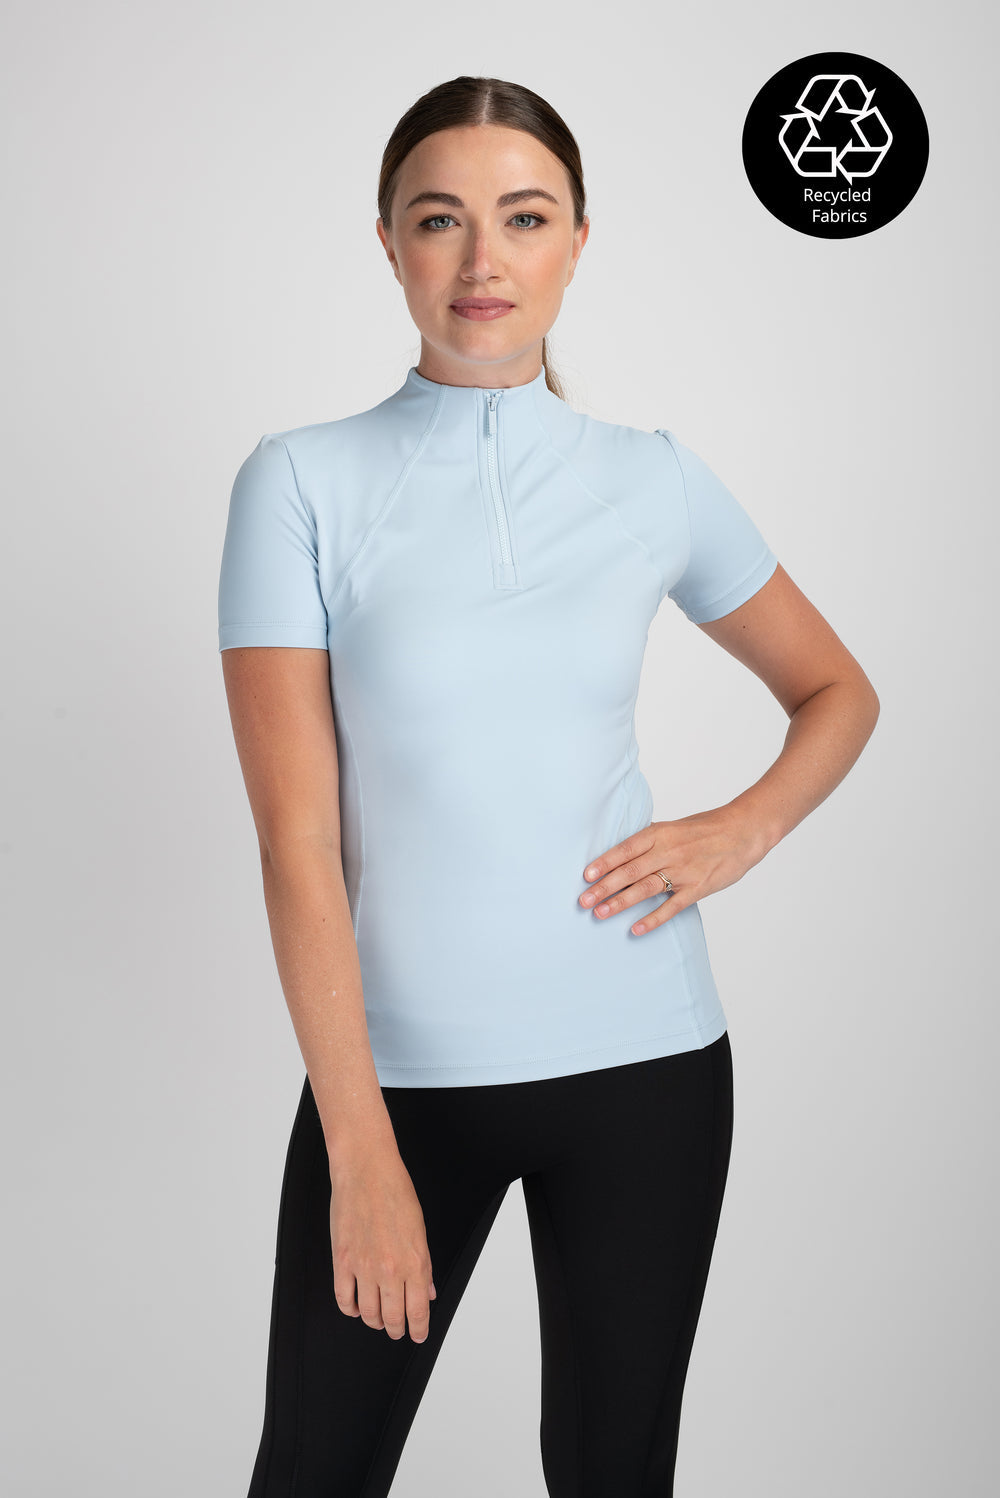 Mochara Short Sleeve Recycled Base Layer-Southern Sport Horses-The Equestrian